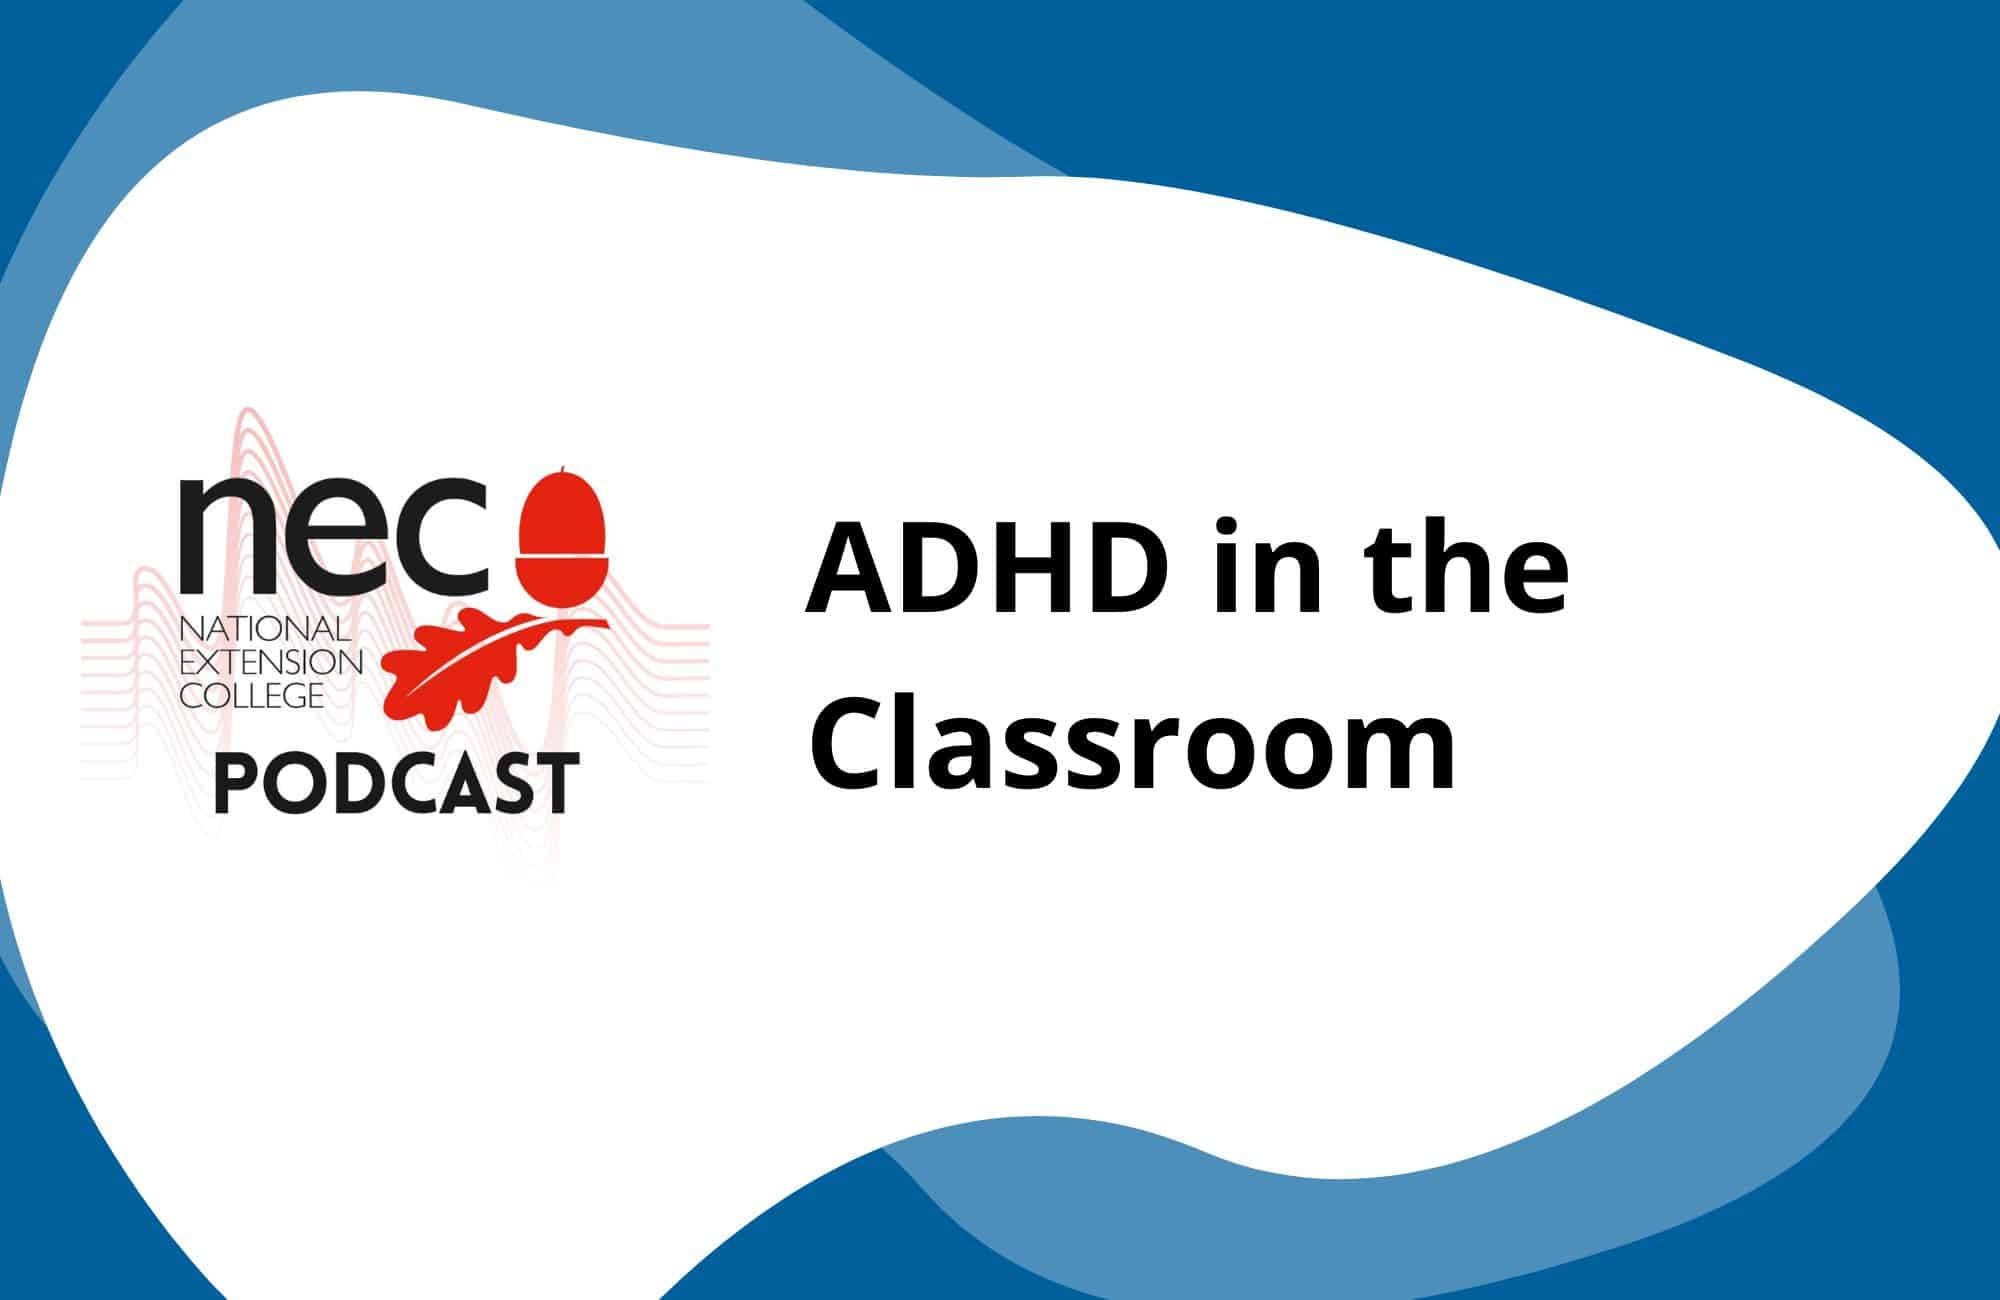 ADHD in the Classroom - National Extension College